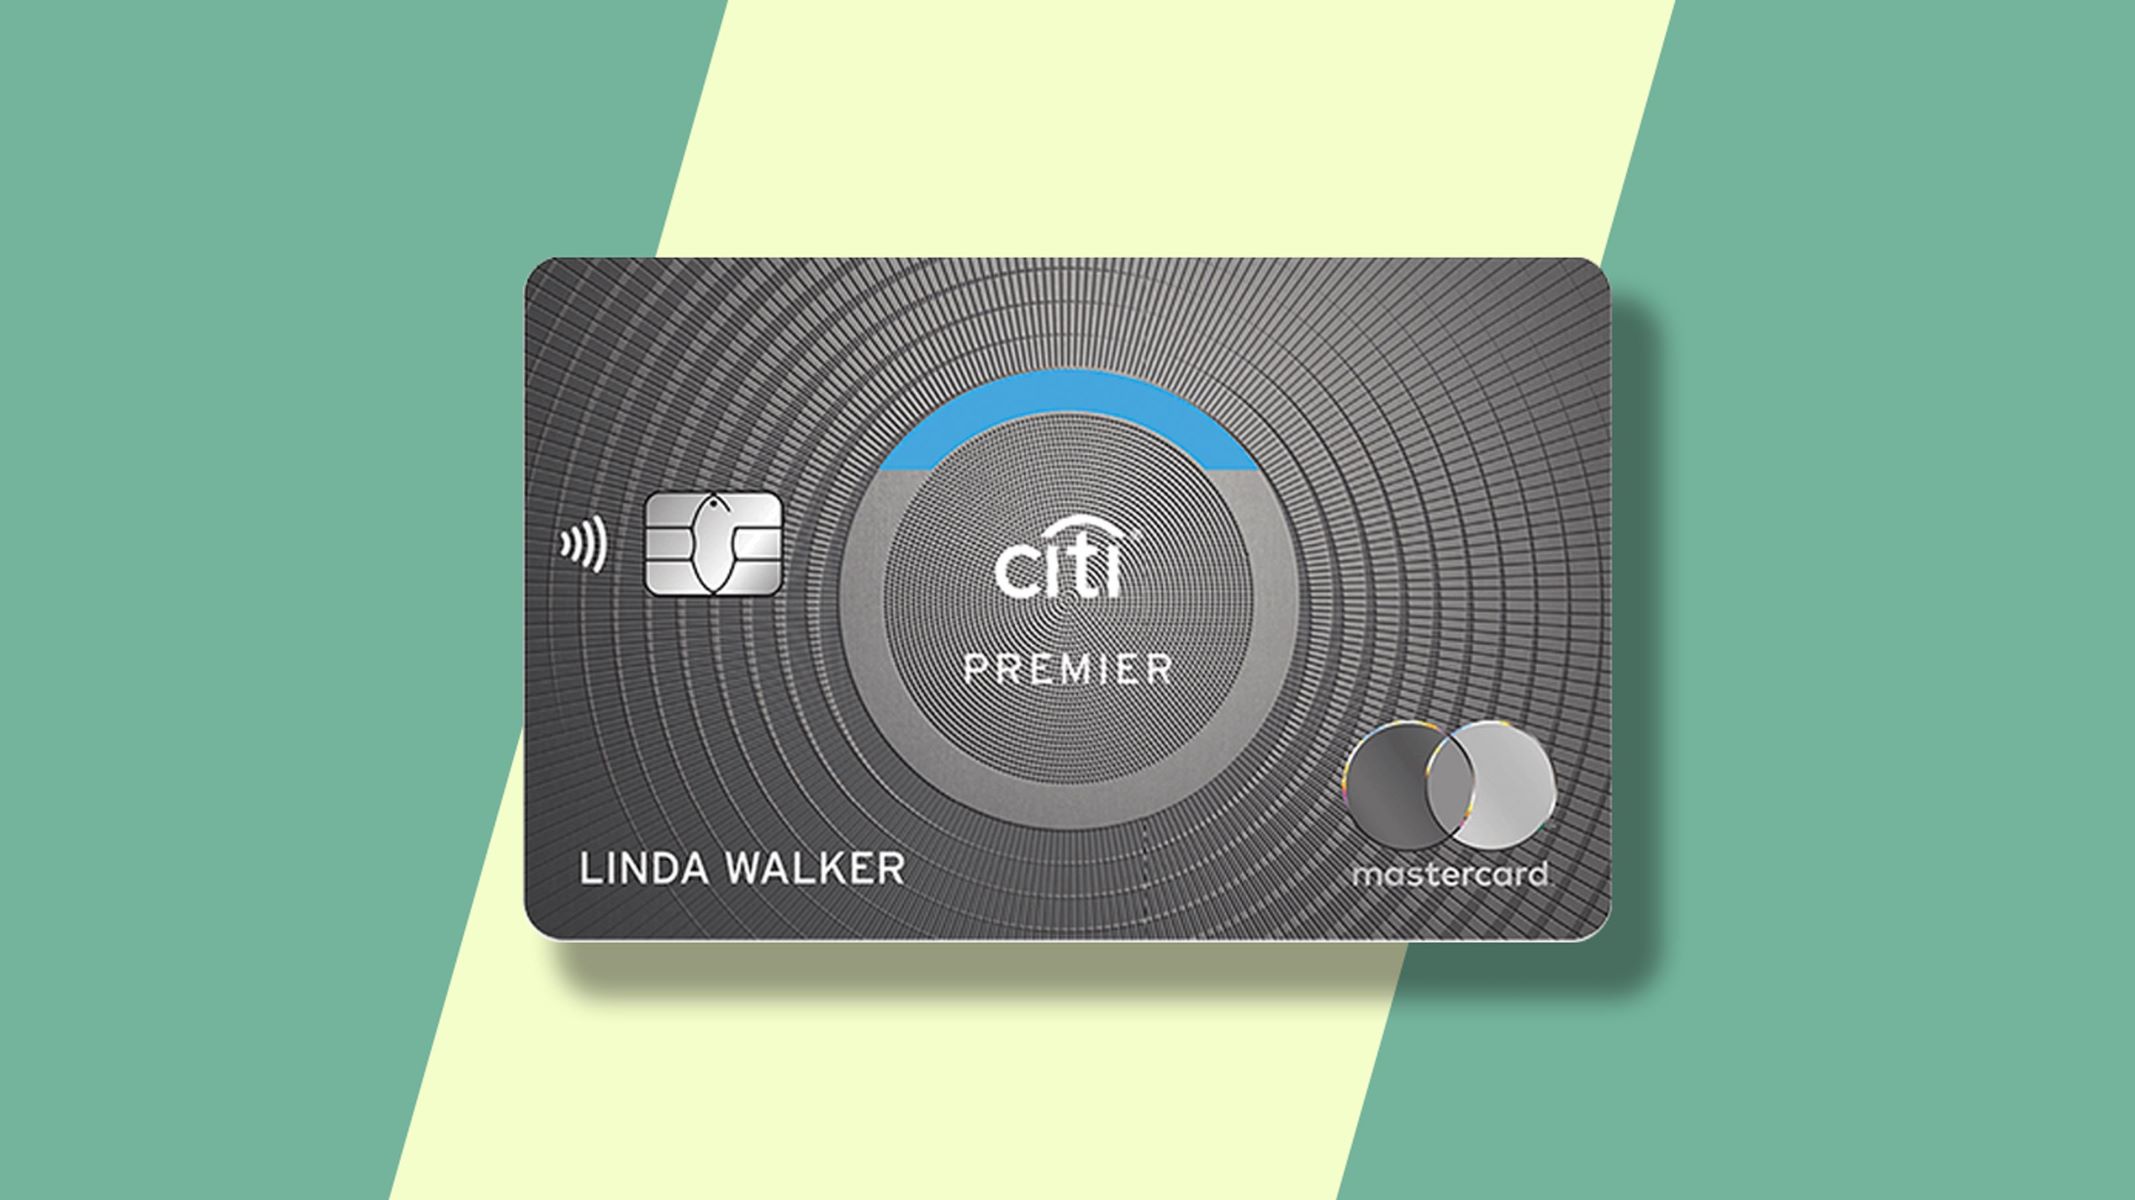 How To Activate My First Premier Credit Card